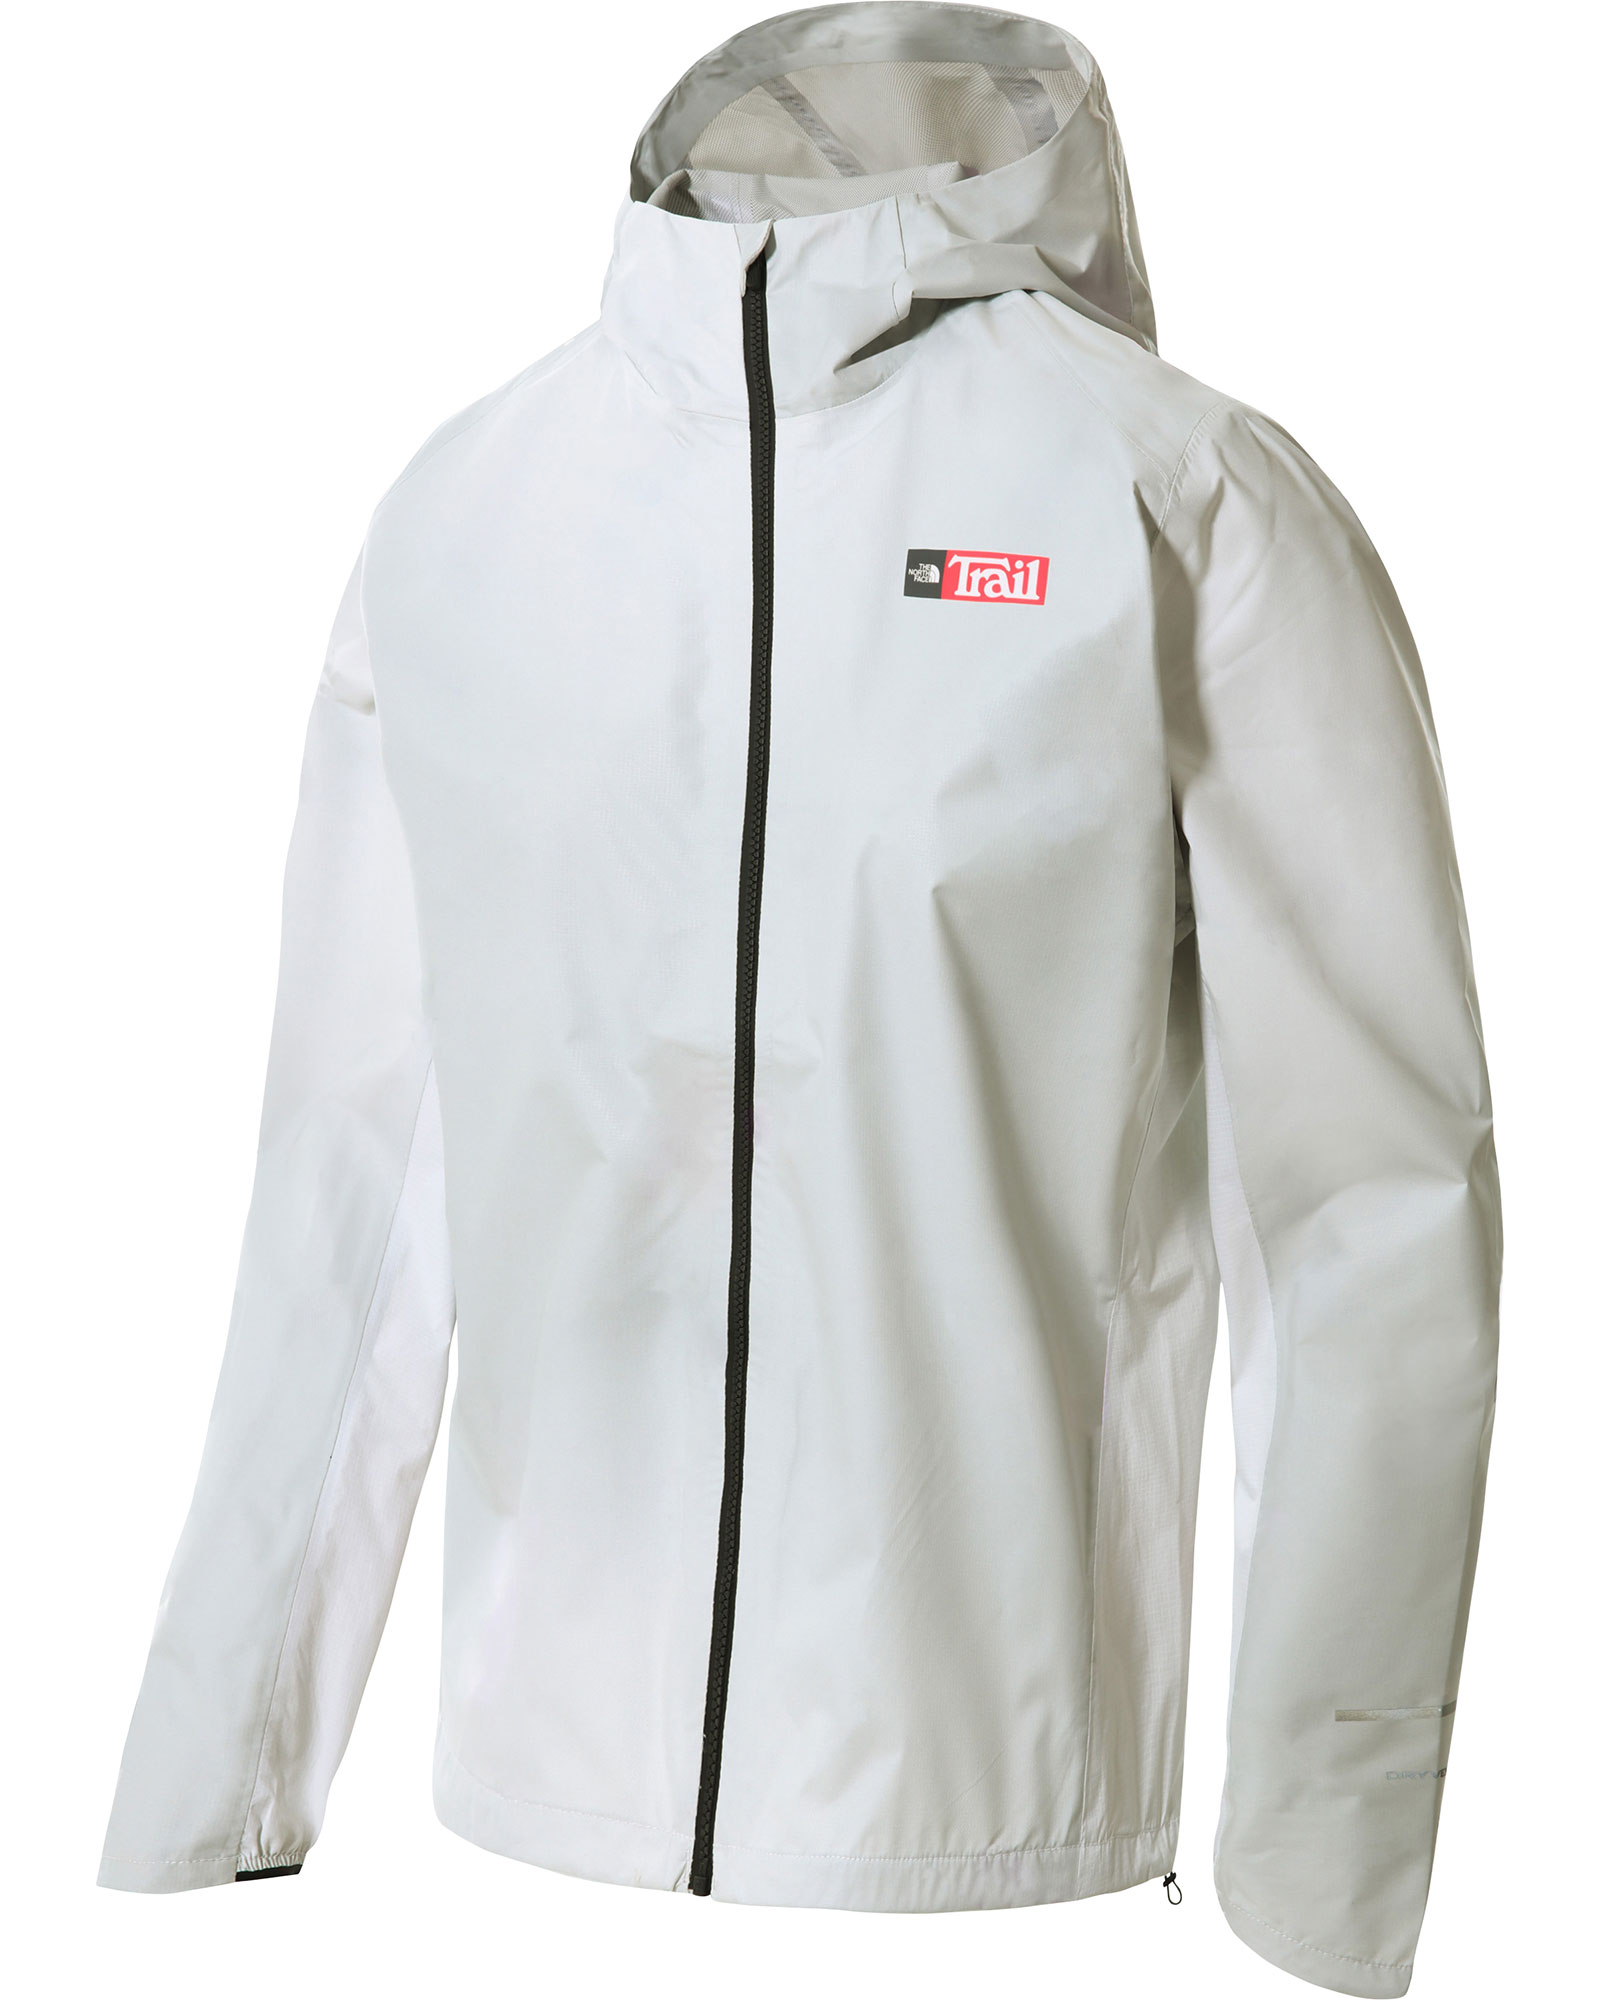 The North Face First Dawn Print Women’s Packable Jacket - TNF White Print M